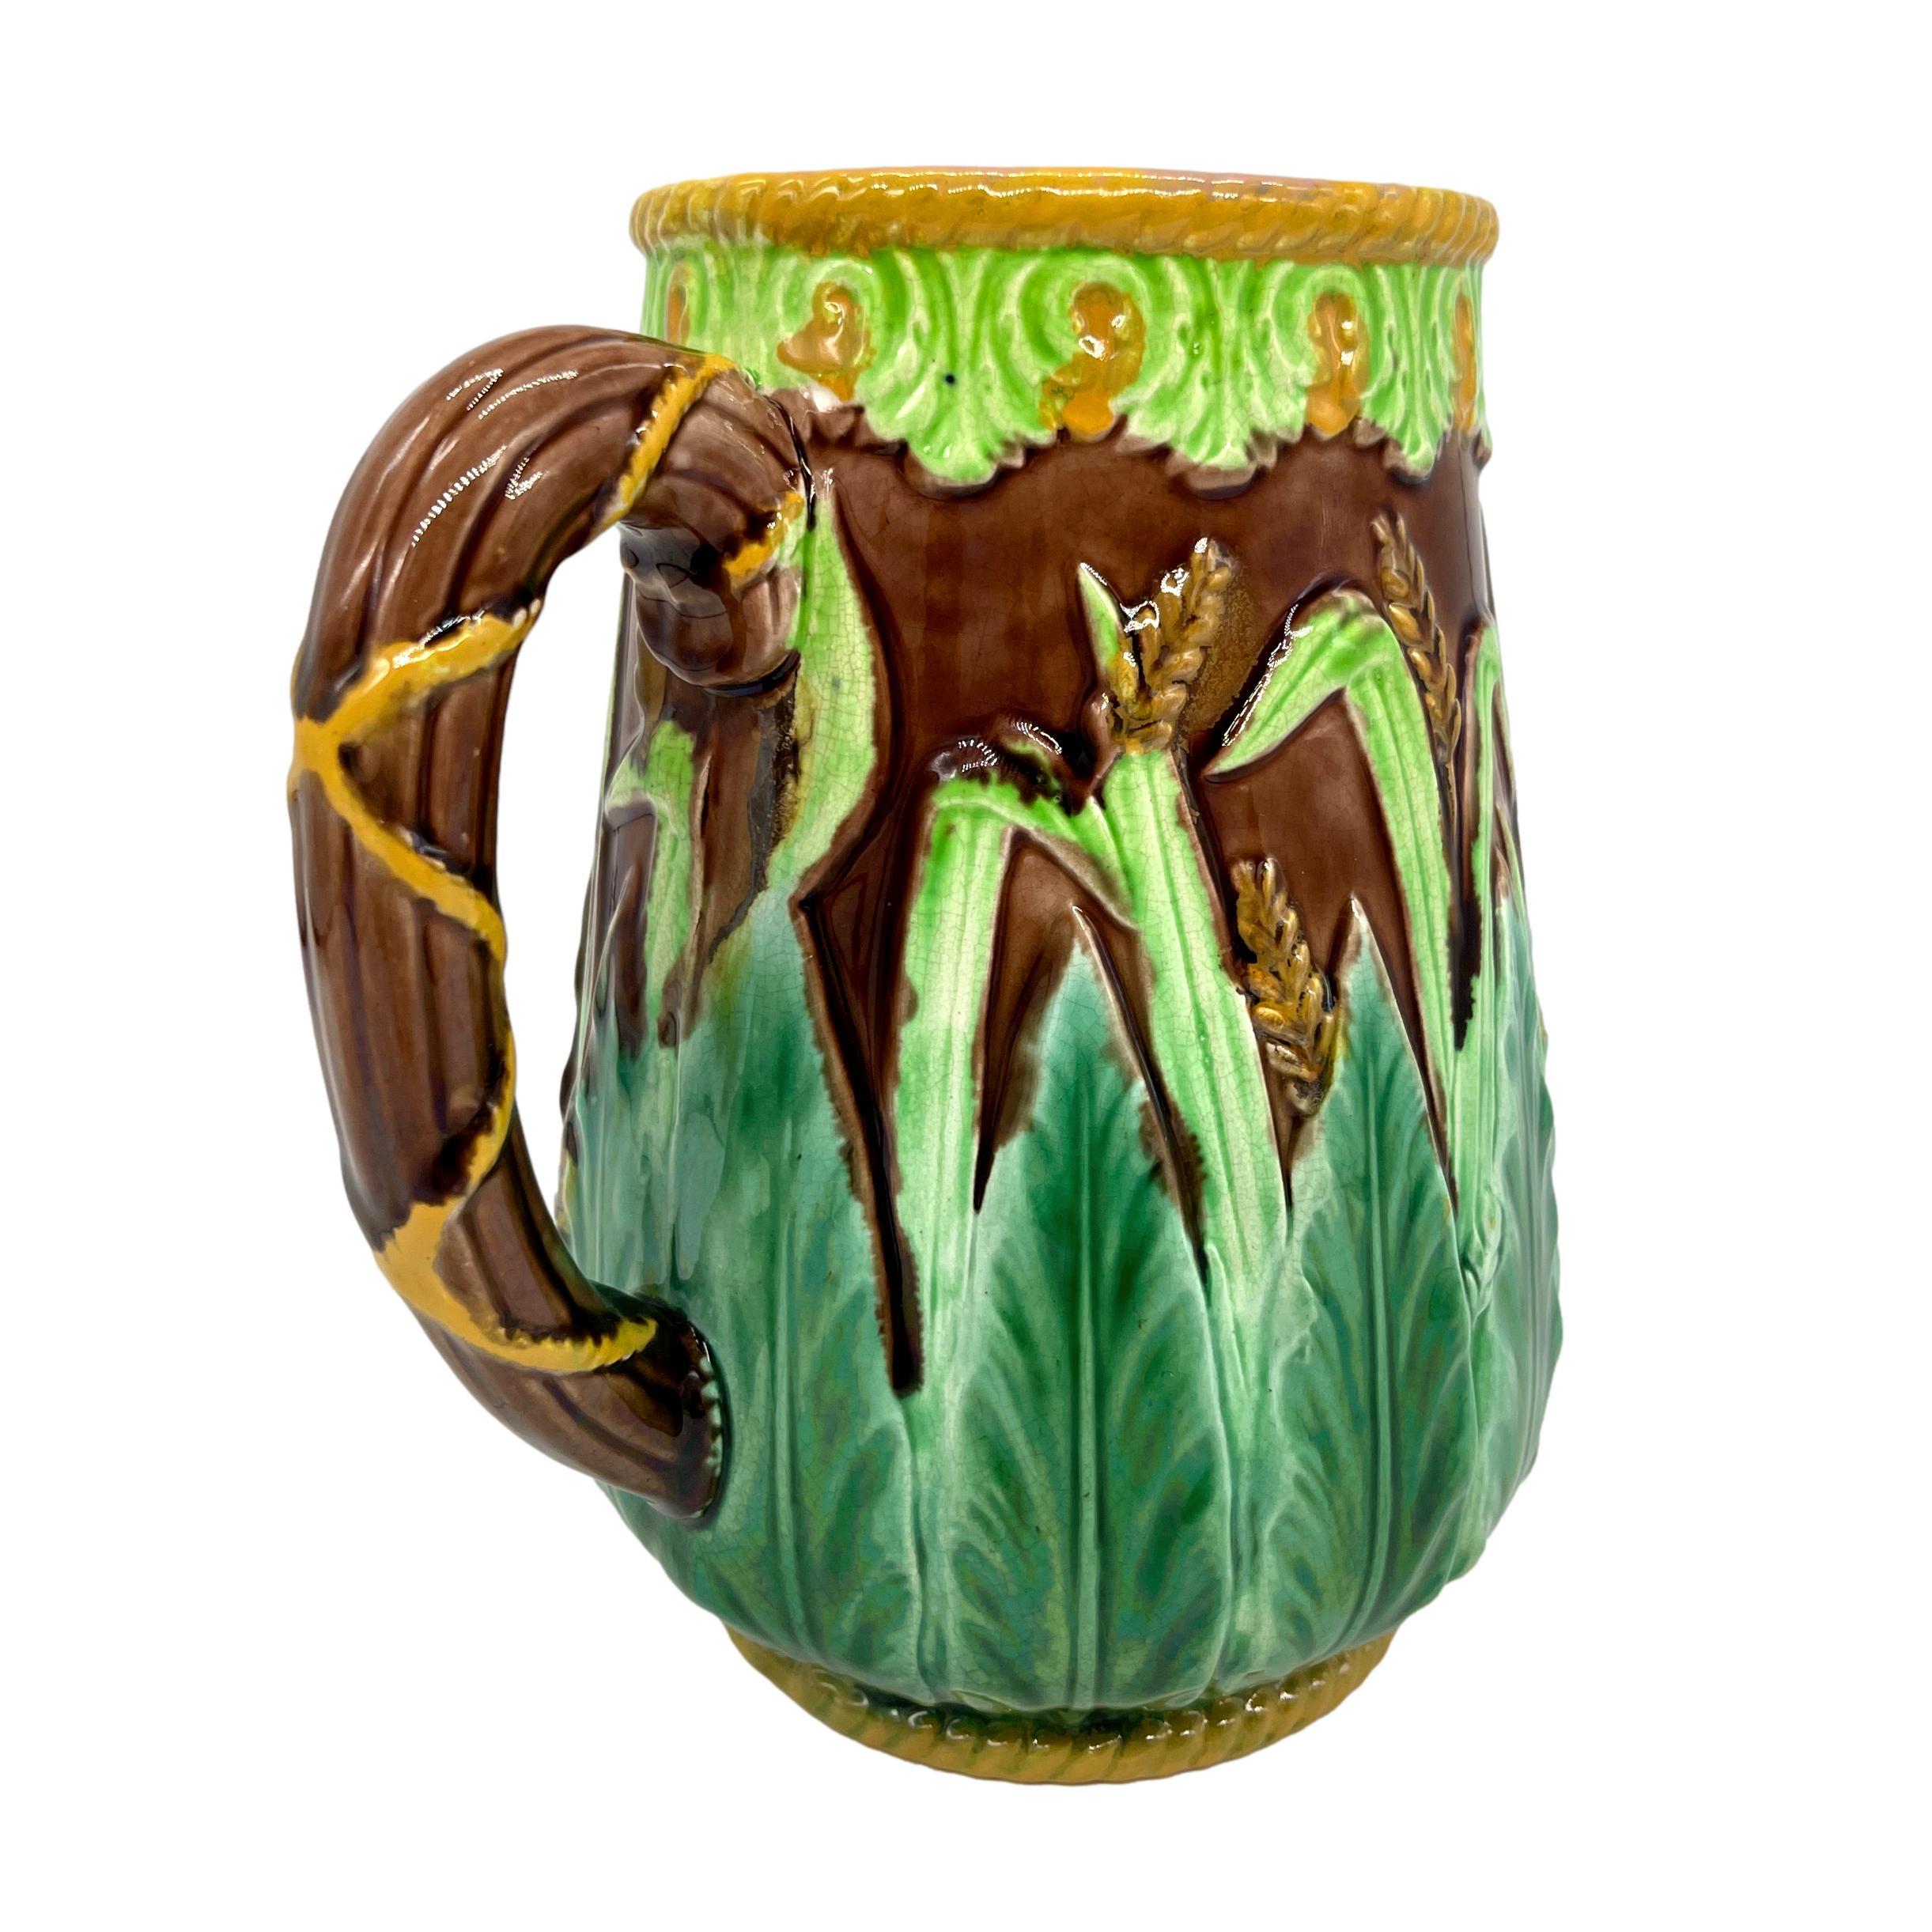 George Jones Majolica Wheat Pitcher with Green Acanthus Leaves, Ca. 1875 For Sale 1